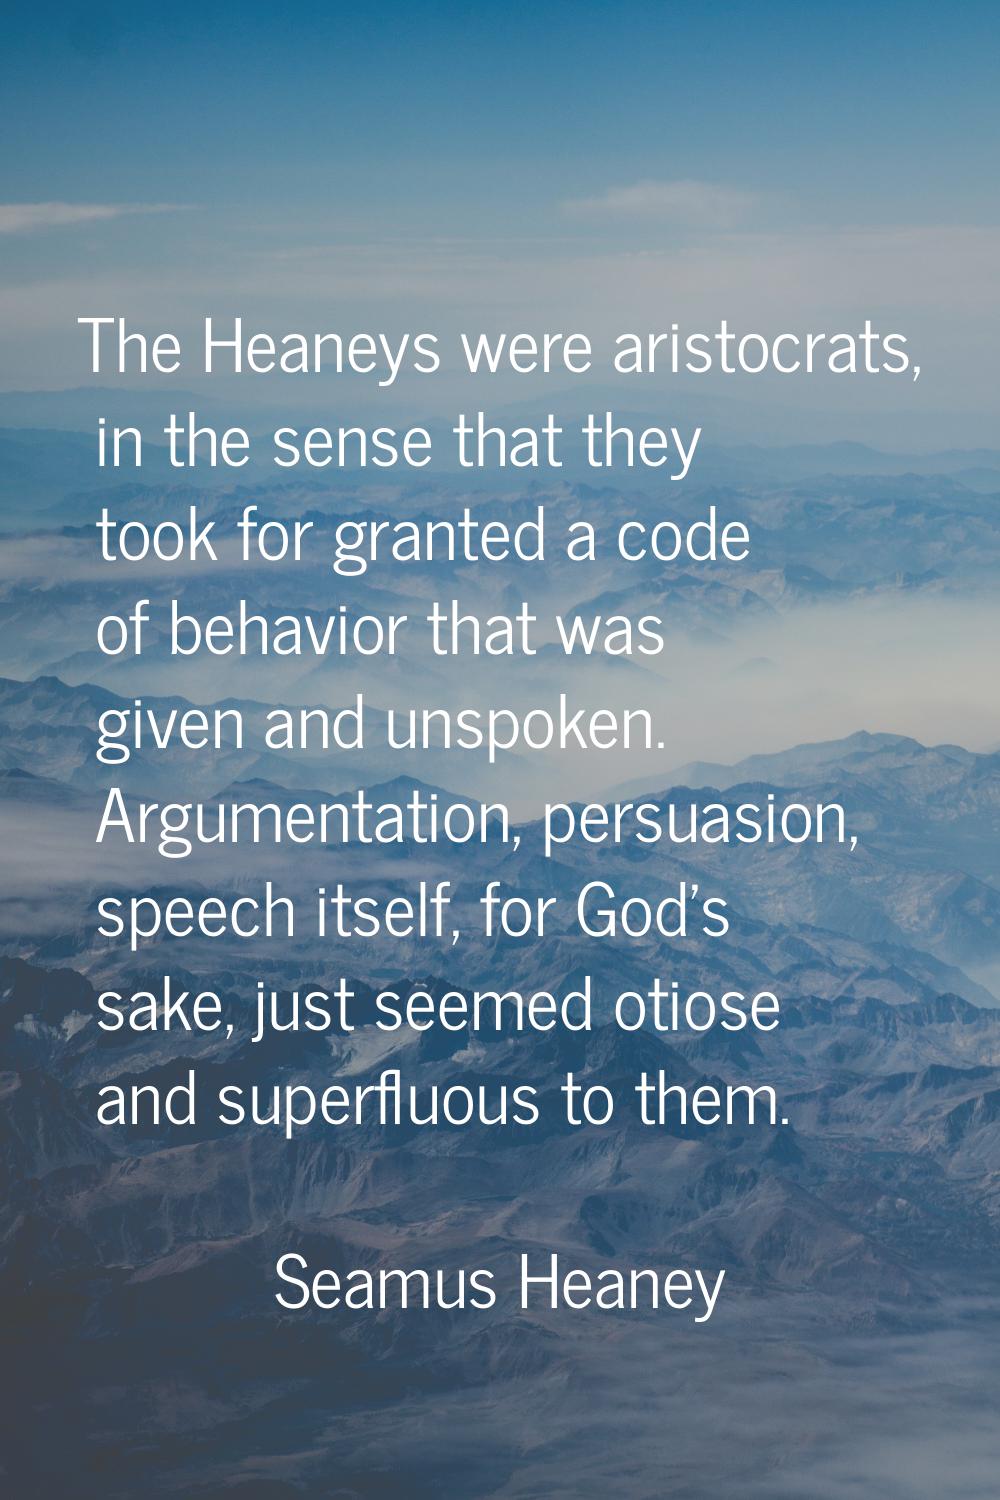 The Heaneys were aristocrats, in the sense that they took for granted a code of behavior that was g